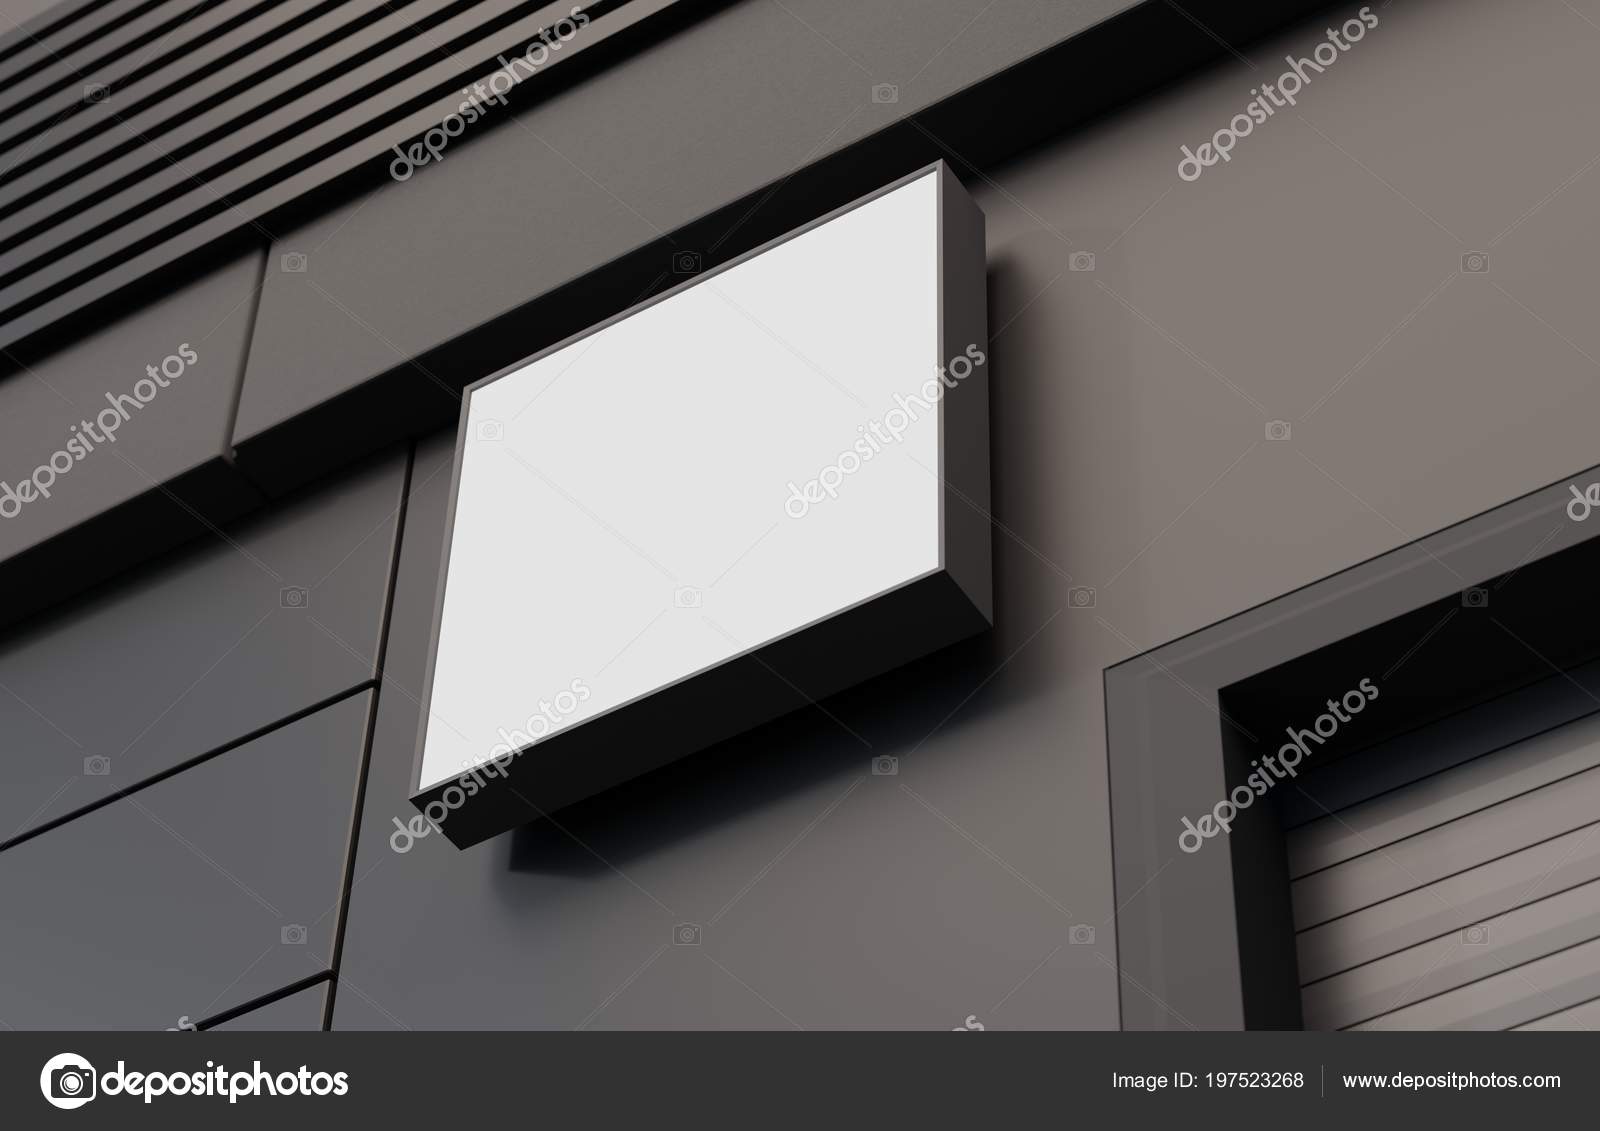 Download Blank Outdoor Signage Signboard Mockup Sign Mounted Building Logo Presentation Royalty Free Photo Stock Image By C Barbra Ford 197523268